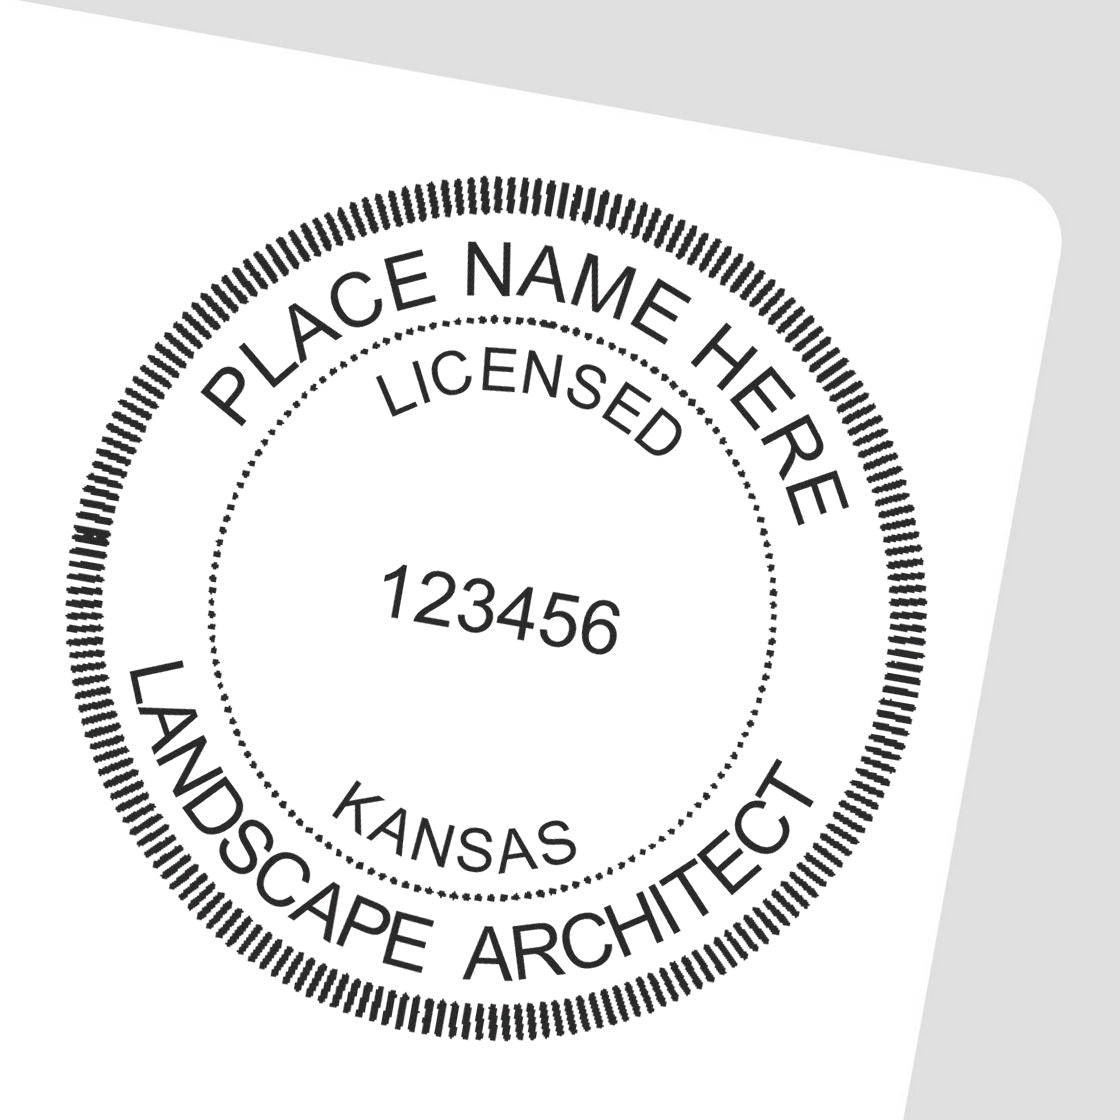 A lifestyle photo showing a stamped image of the Kansas Landscape Architectural Seal Stamp on a piece of paper